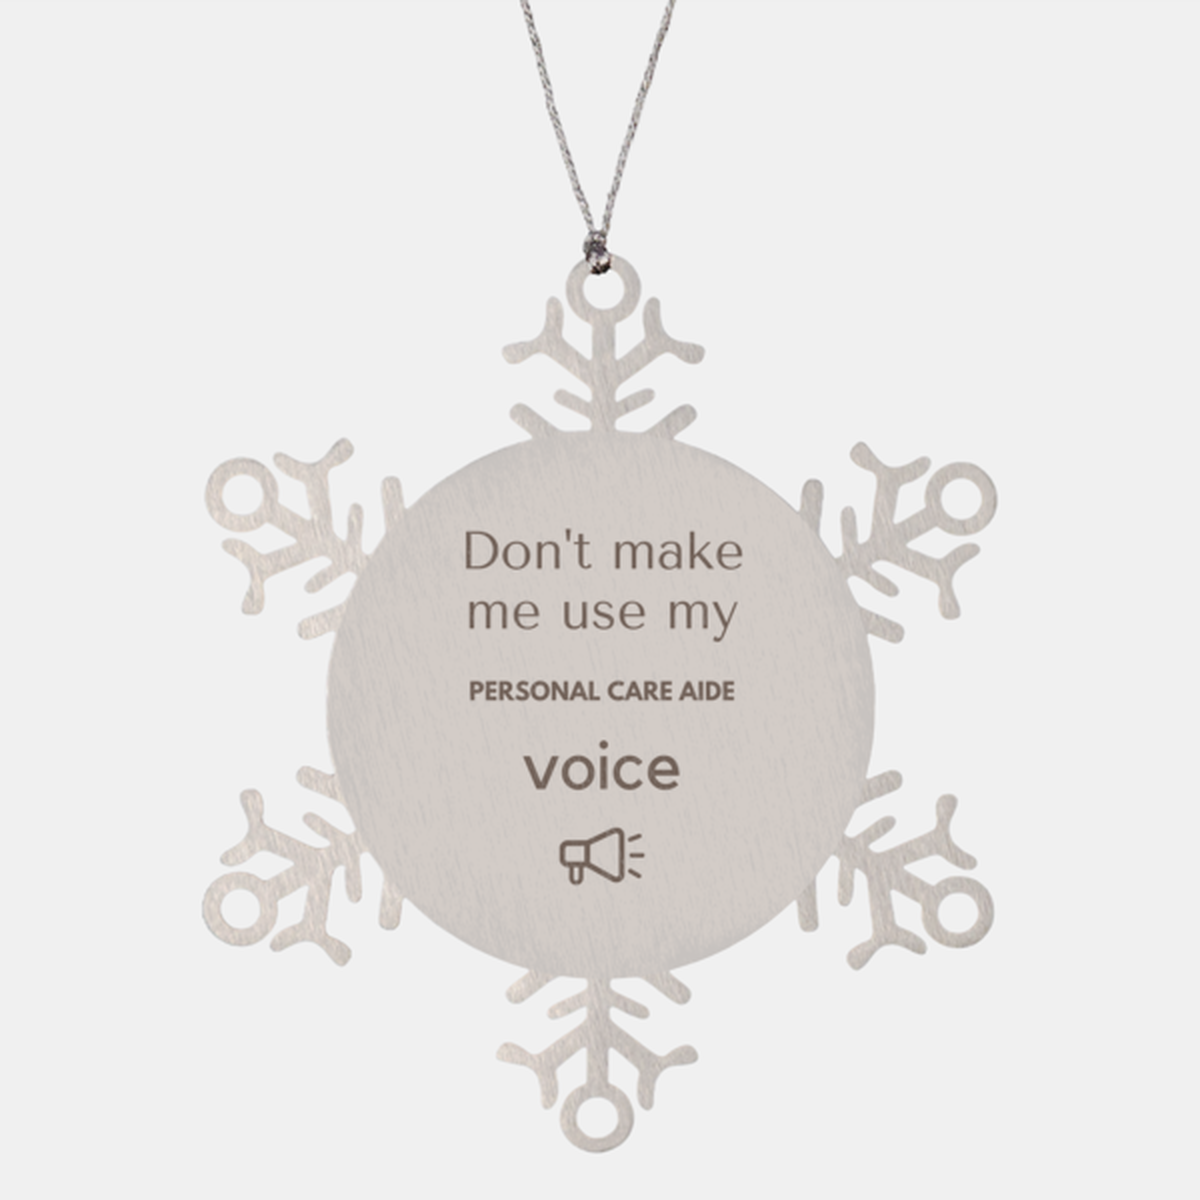 Don't make me use my Personal Care Aide voice, Sarcasm Personal Care Aide Ornament Gifts, Christmas Personal Care Aide Snowflake Ornament Unique Gifts For Personal Care Aide Coworkers, Men, Women, Colleague, Friends